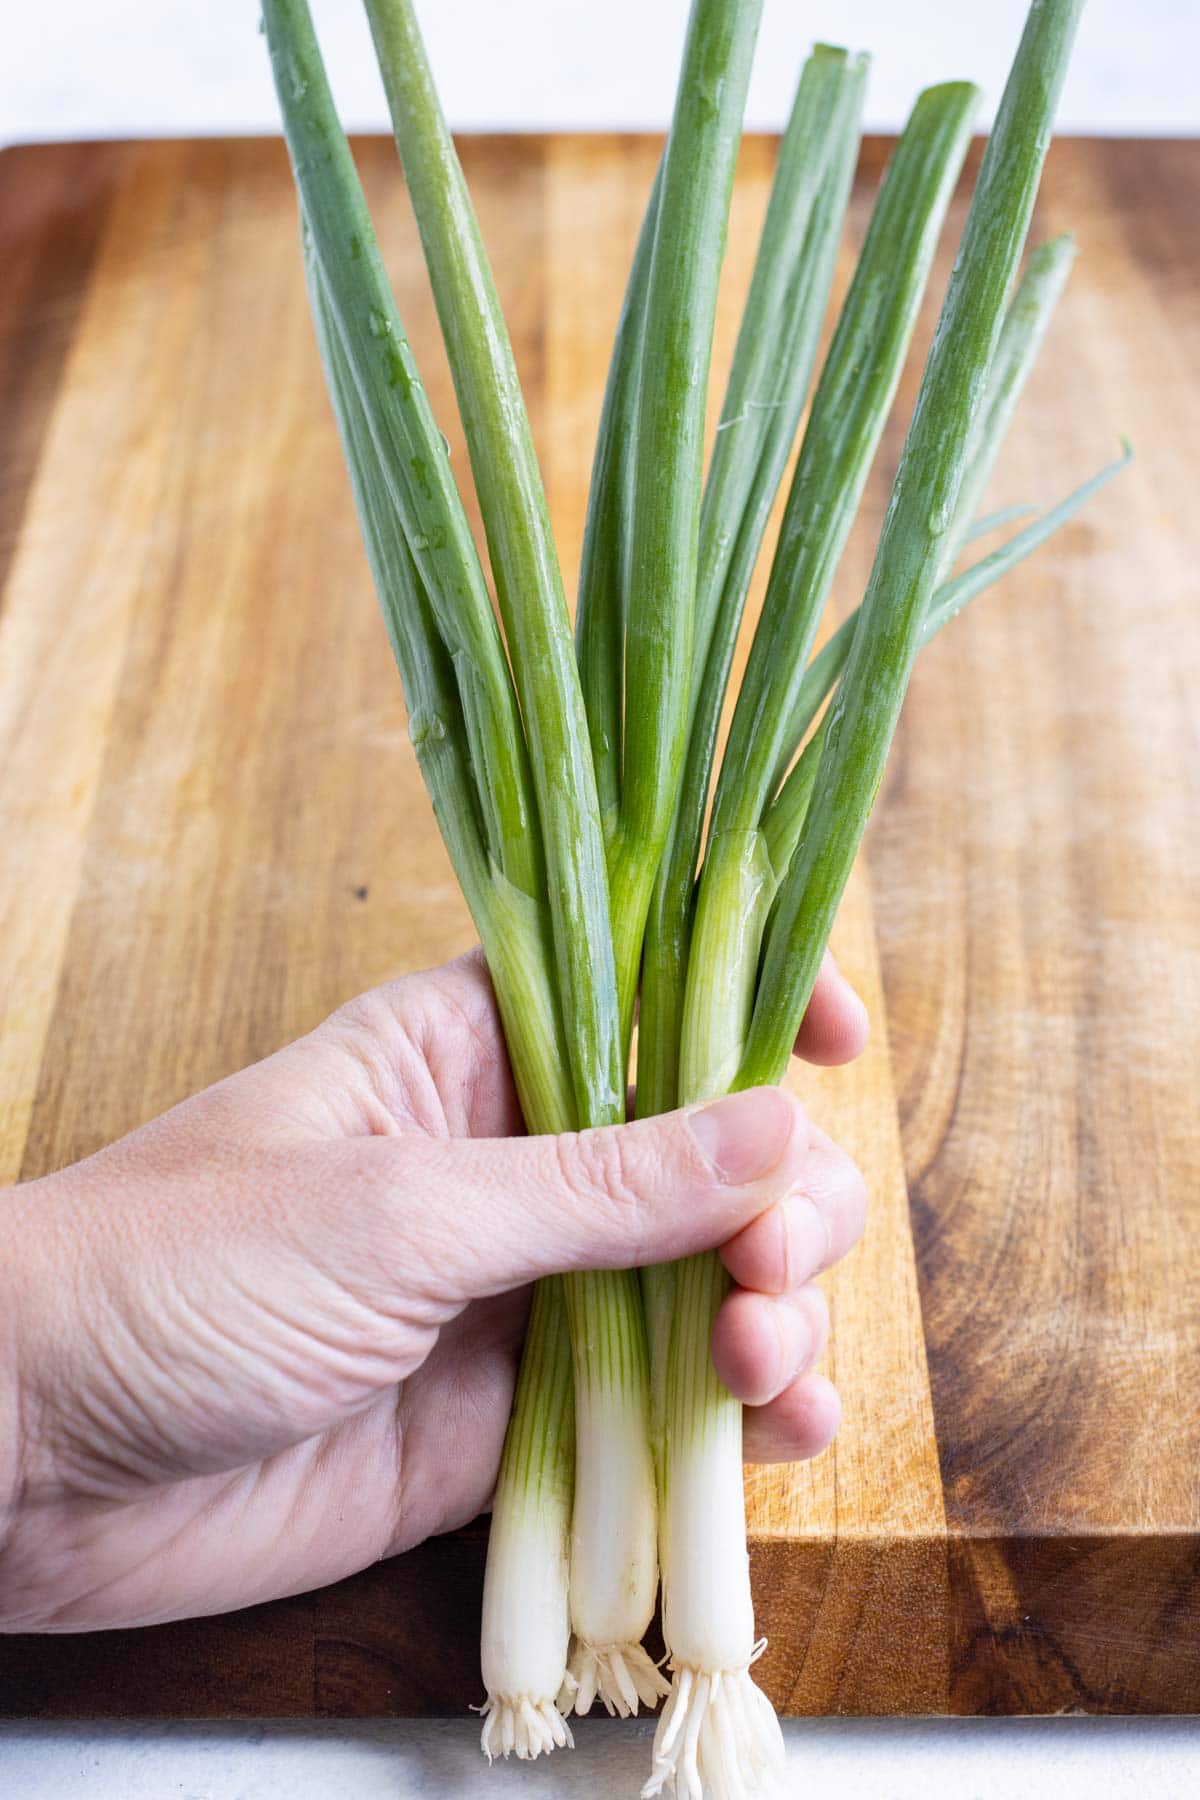 How to Freeze Green Onions